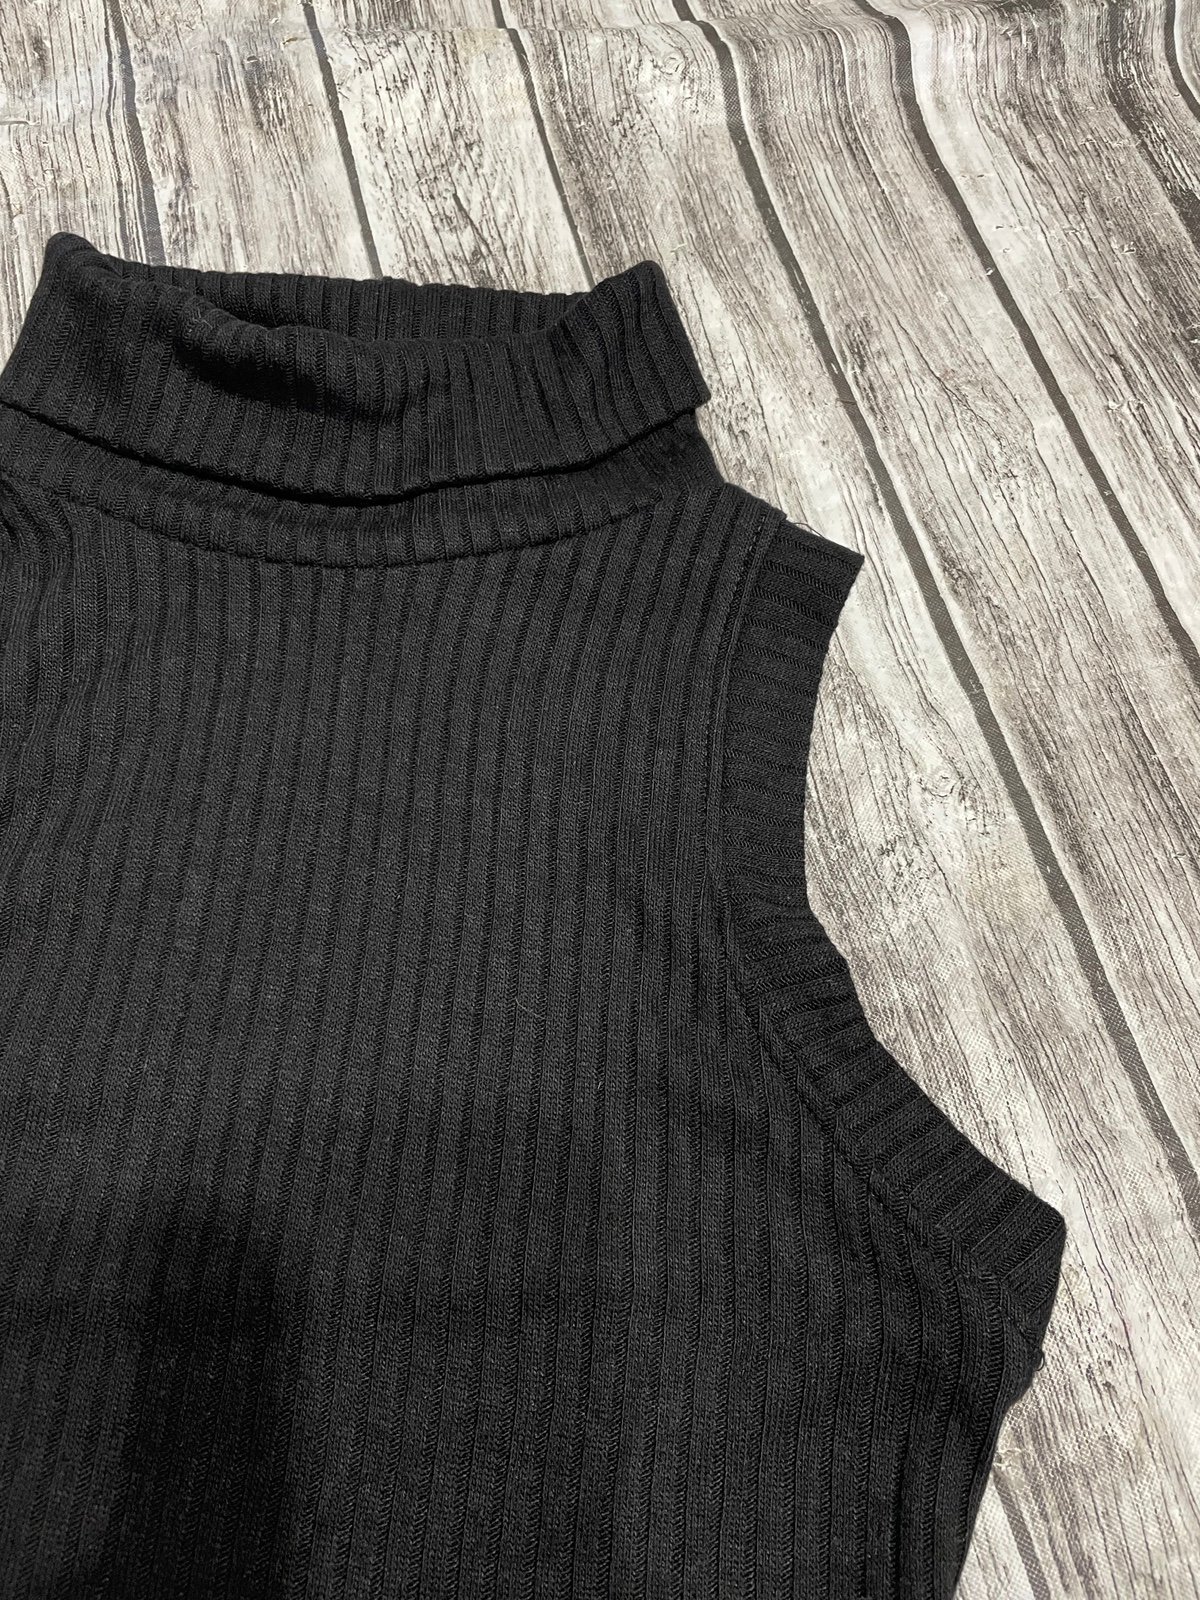 The Best Seller Ladies small Bozzolo black ribbed sleeveless knit top with turtle neck excellent PdETj2fhm Counter Genuine 